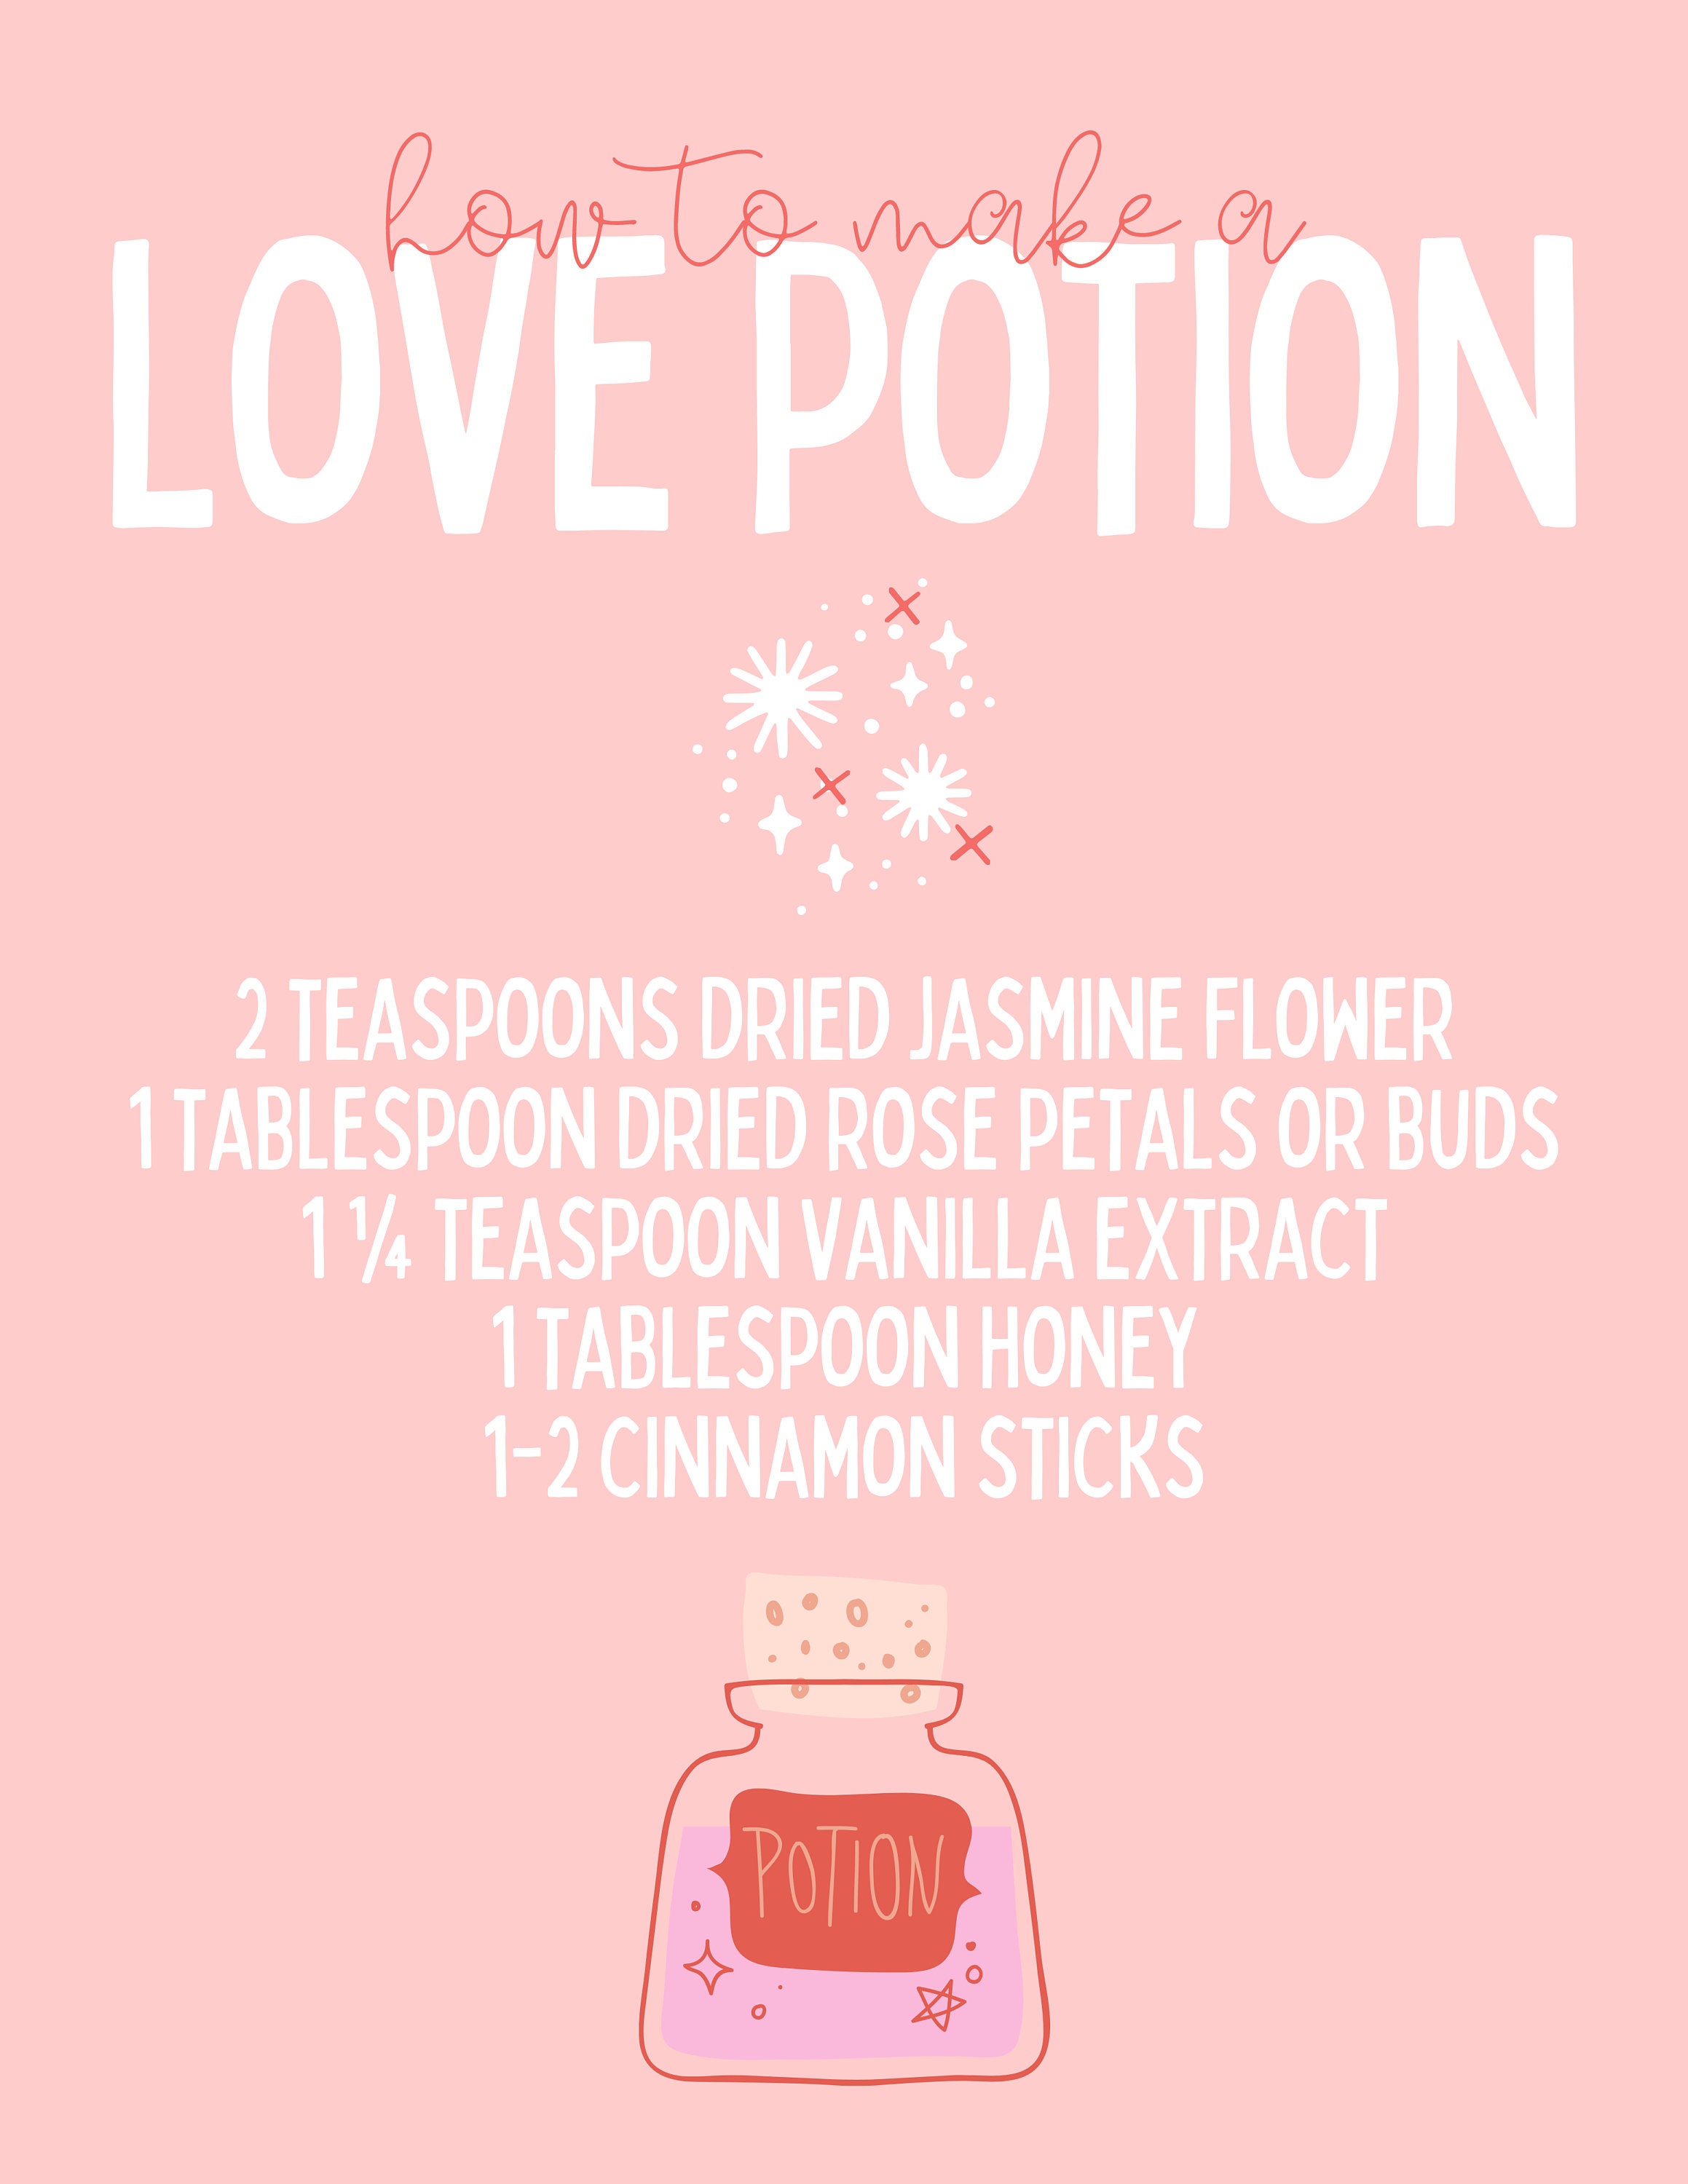 How To Make A Love Potion, Recipe